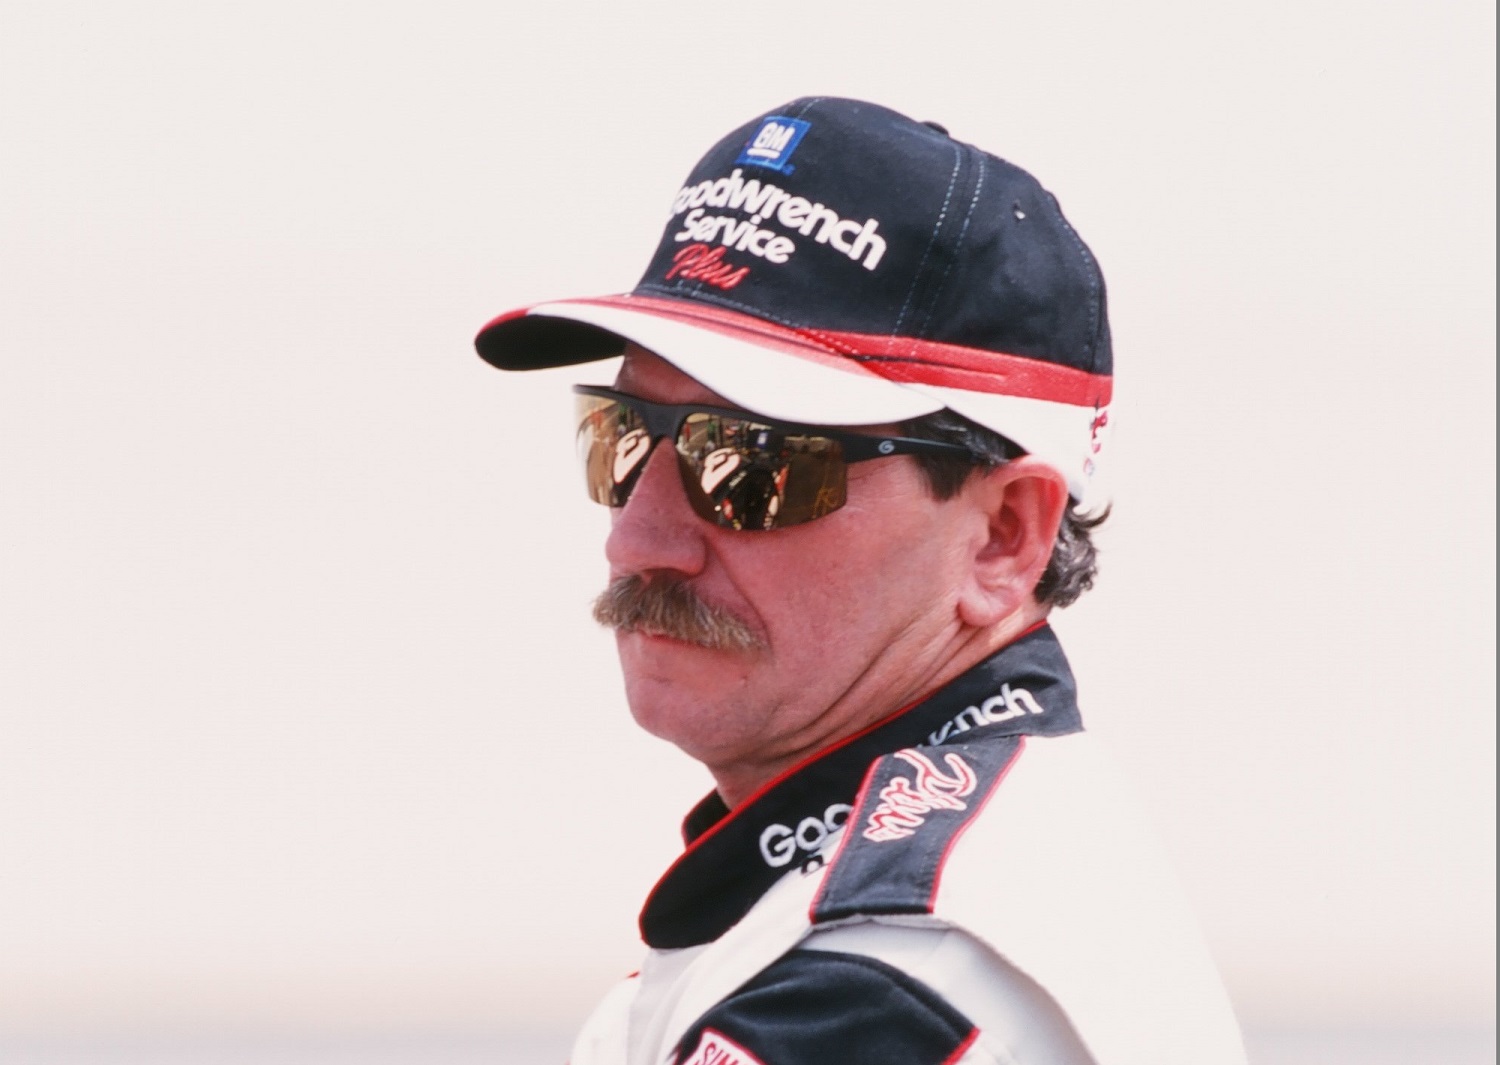 Dale Earnhardt surprised NASCAR observers by hiring Michael Waltrip to drive for him in the 2001 season, beginning with the Daytona 500.